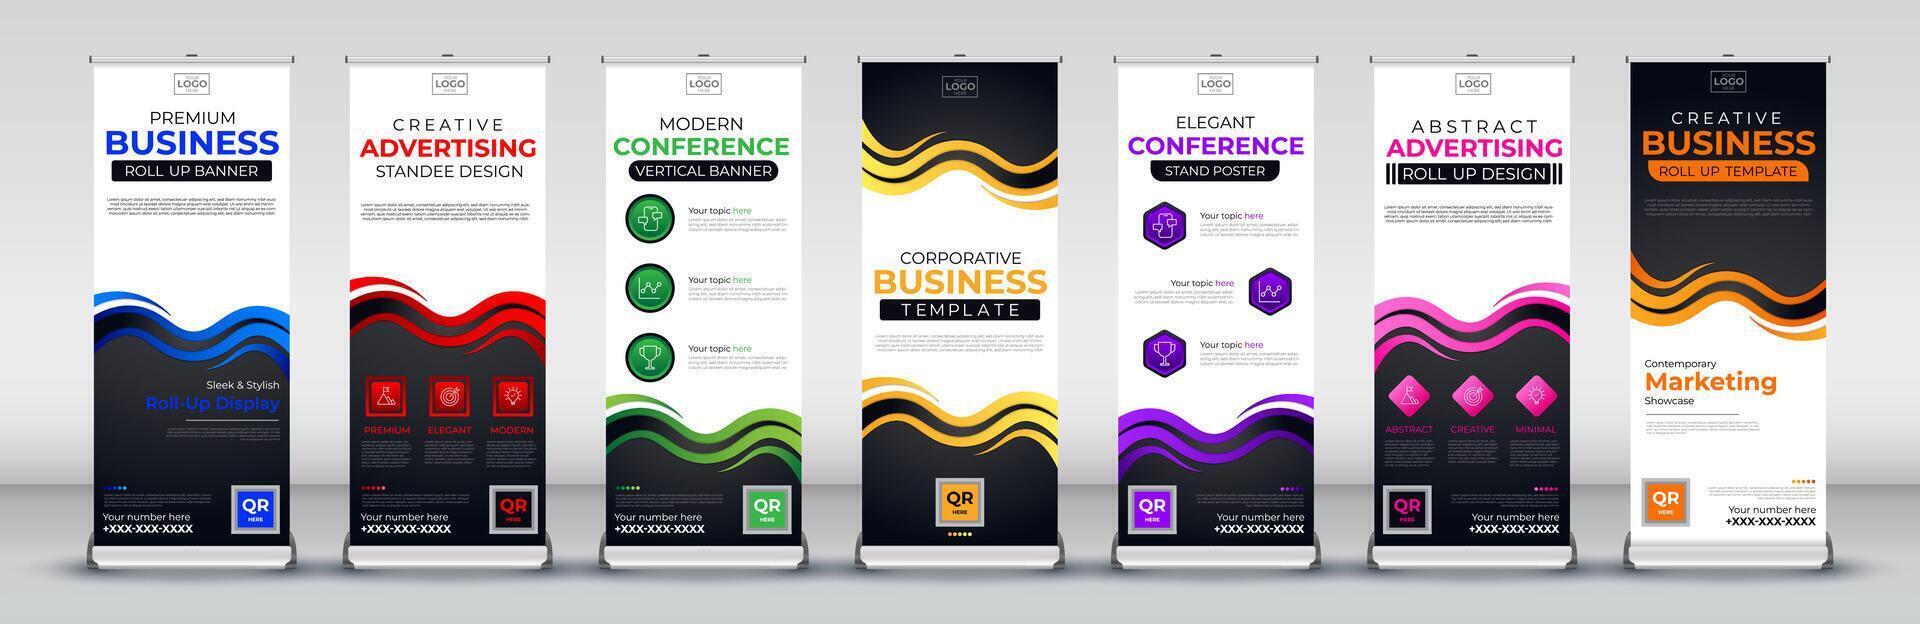 wave abstract roll up banners for events, meetings, presentations in blue, red, green, yellow, purple, pink and orange colours vector